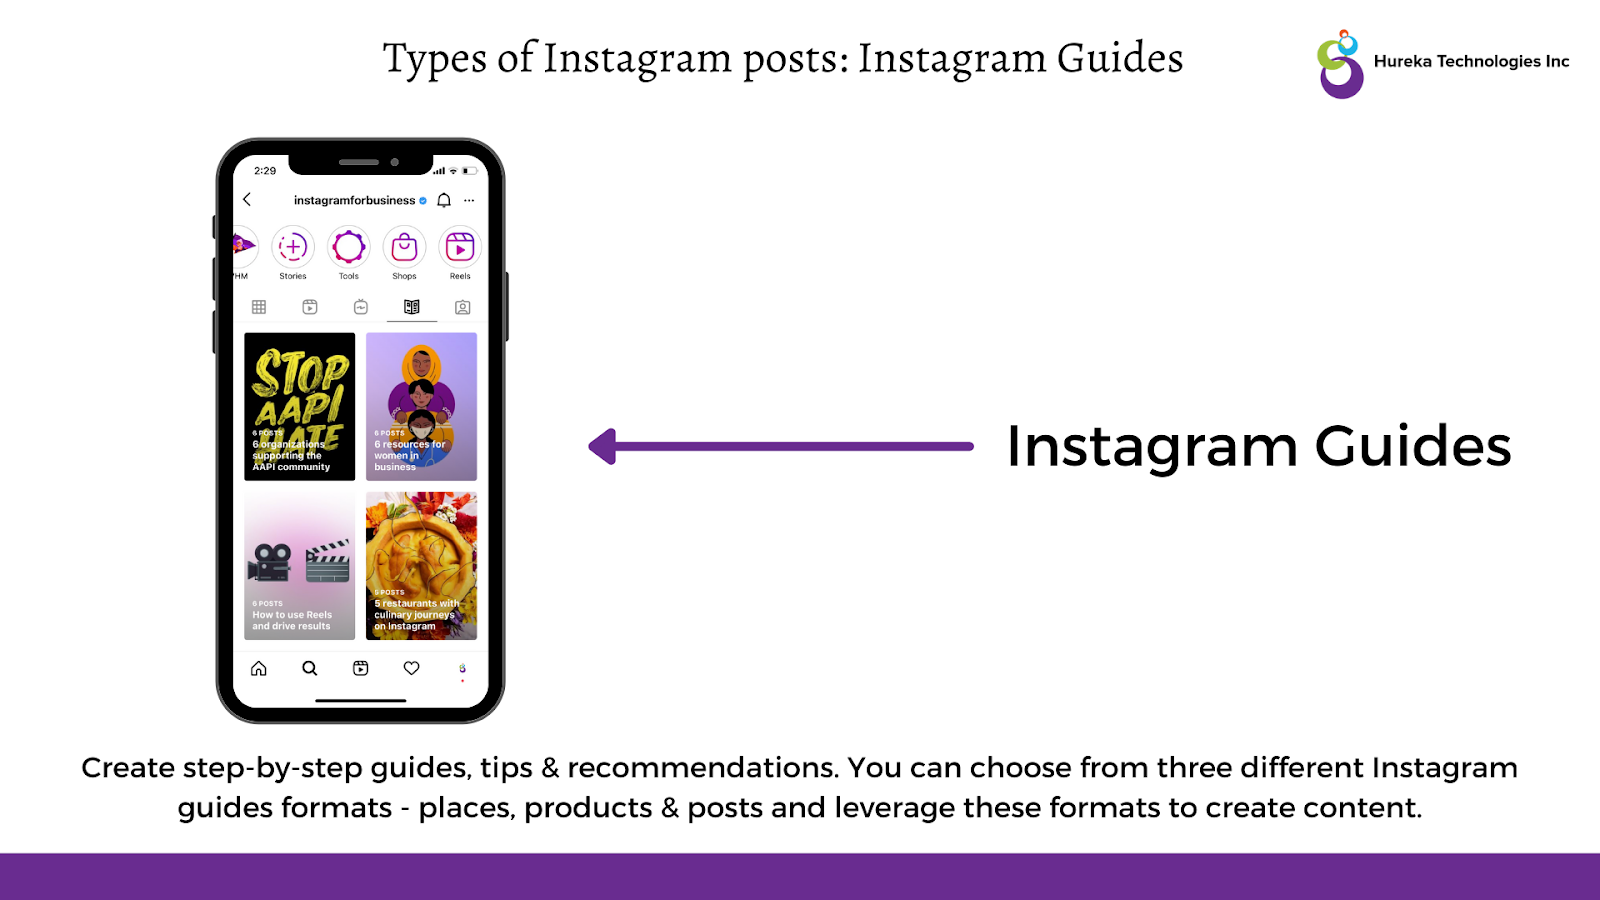 Illustration showing Instagram Guides - a new Instagram feature